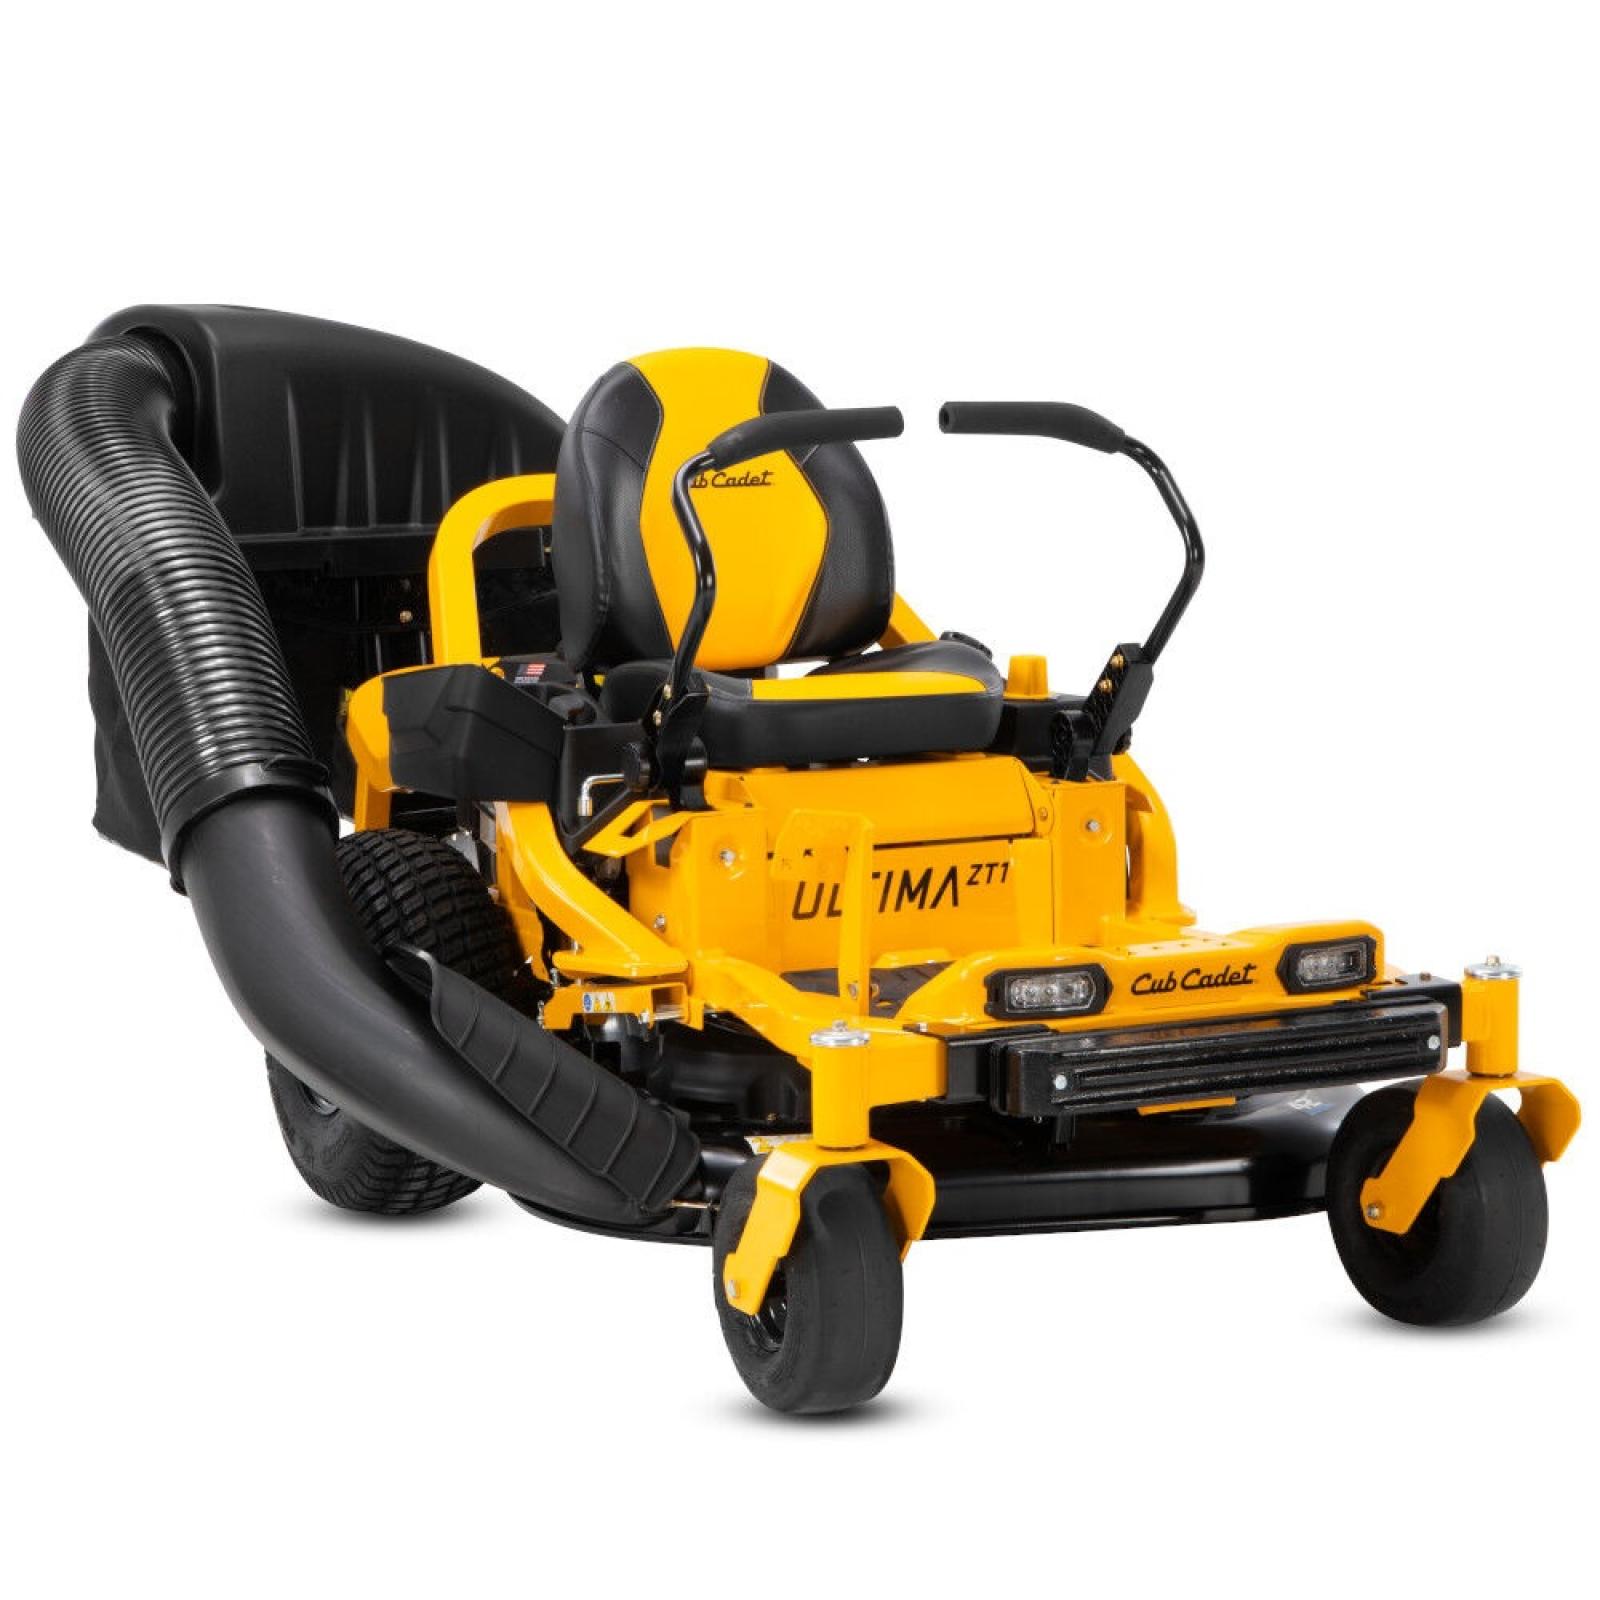 Cub Cadet Double Bagger for Zero-Turn Mowers 42" and 46" Decks